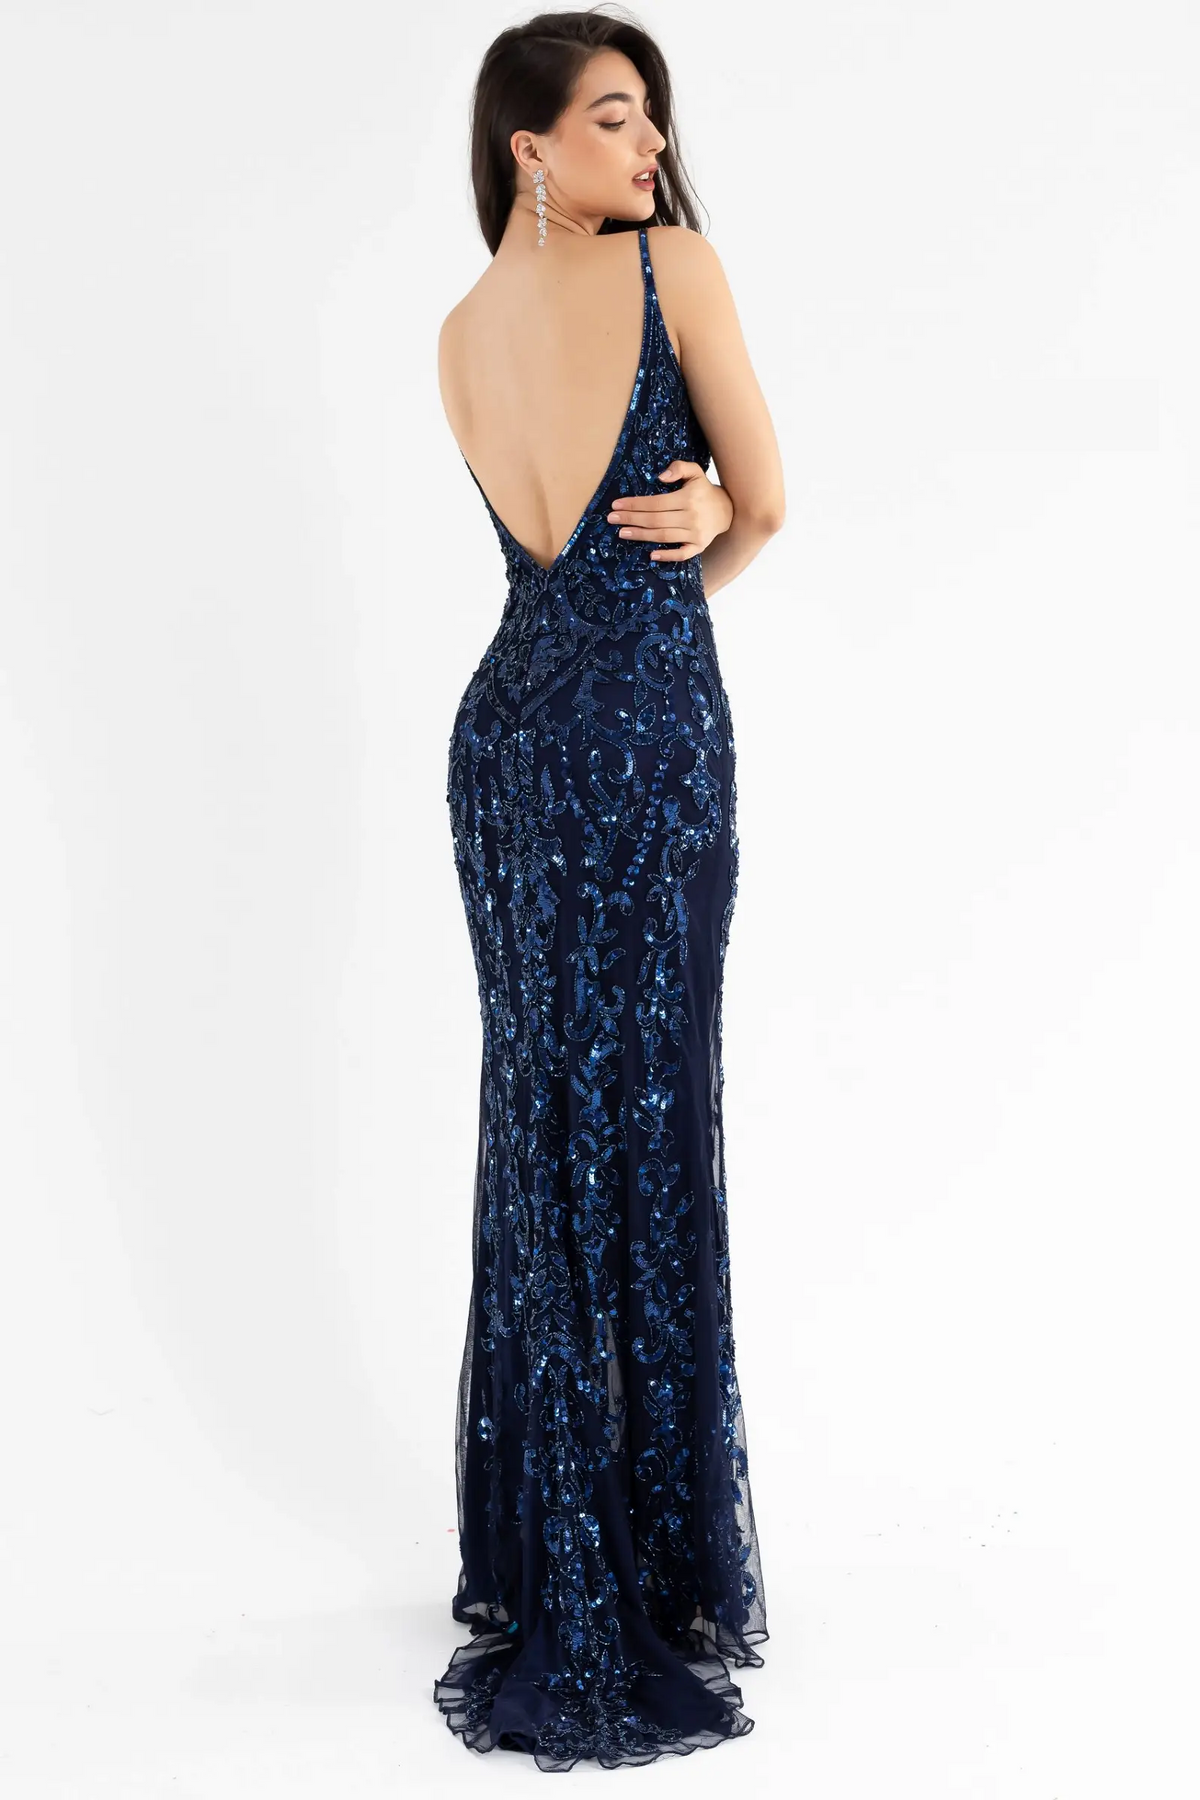 Shop this stunning Primavera dress in Midnight sold by Madeline's Boutique in Toronto and Boca Raton. This sleeveless gown features a fitted silhouette with a plunging neckline and intricate beading detail throughout, perfect for making a bold statement at any high school prom. Purchase now and shine bright like a star on your special night!